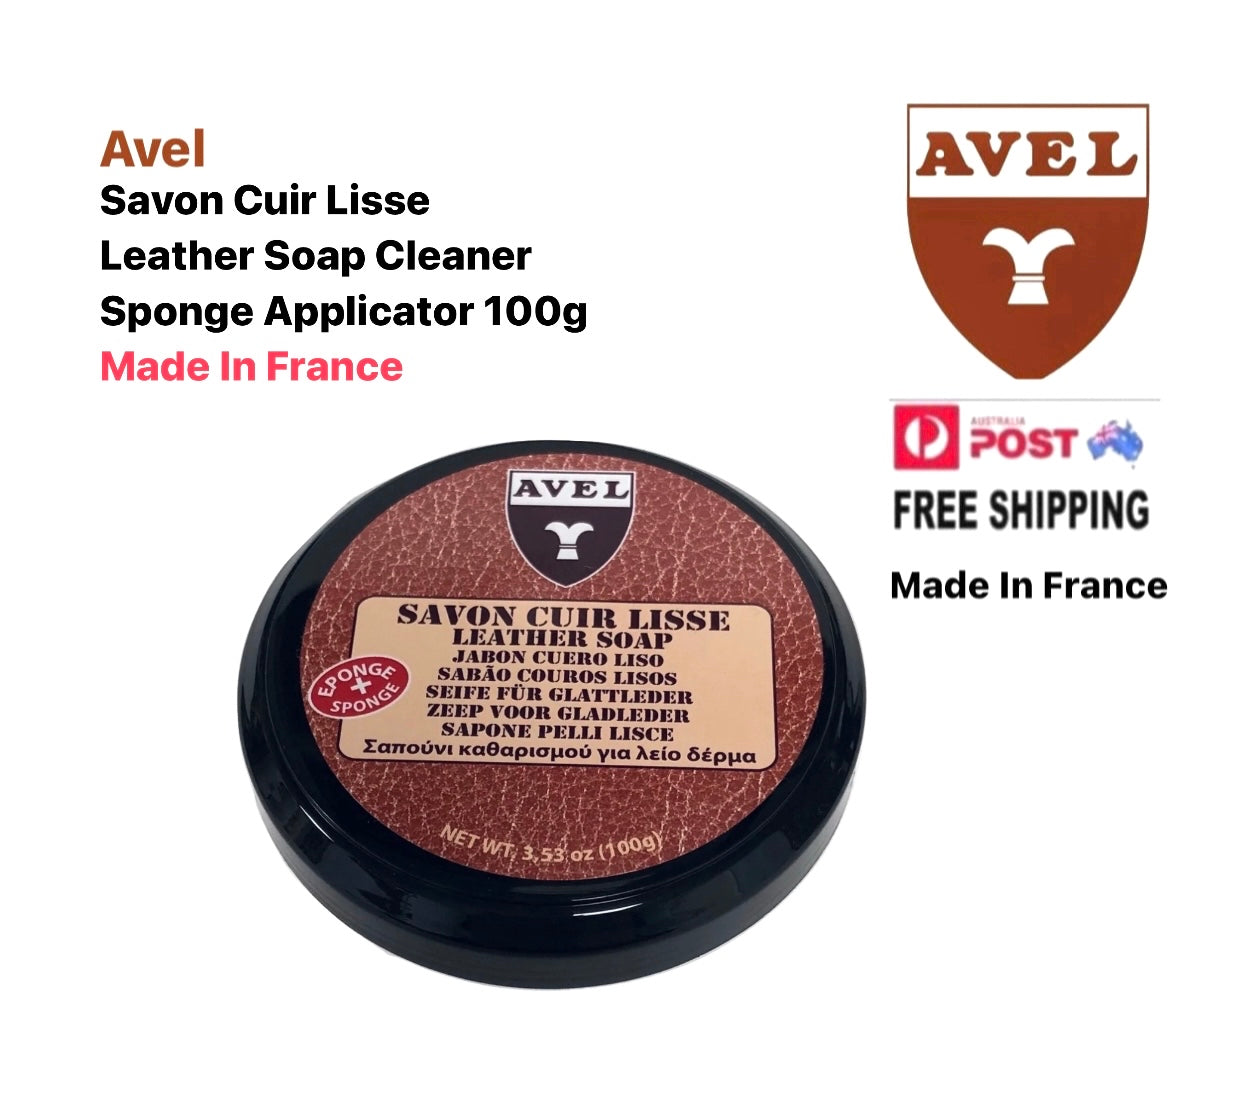 Avel Savon Cuir Lisse Leather Soap Cleaner Sponge Applicator 100g Made In France